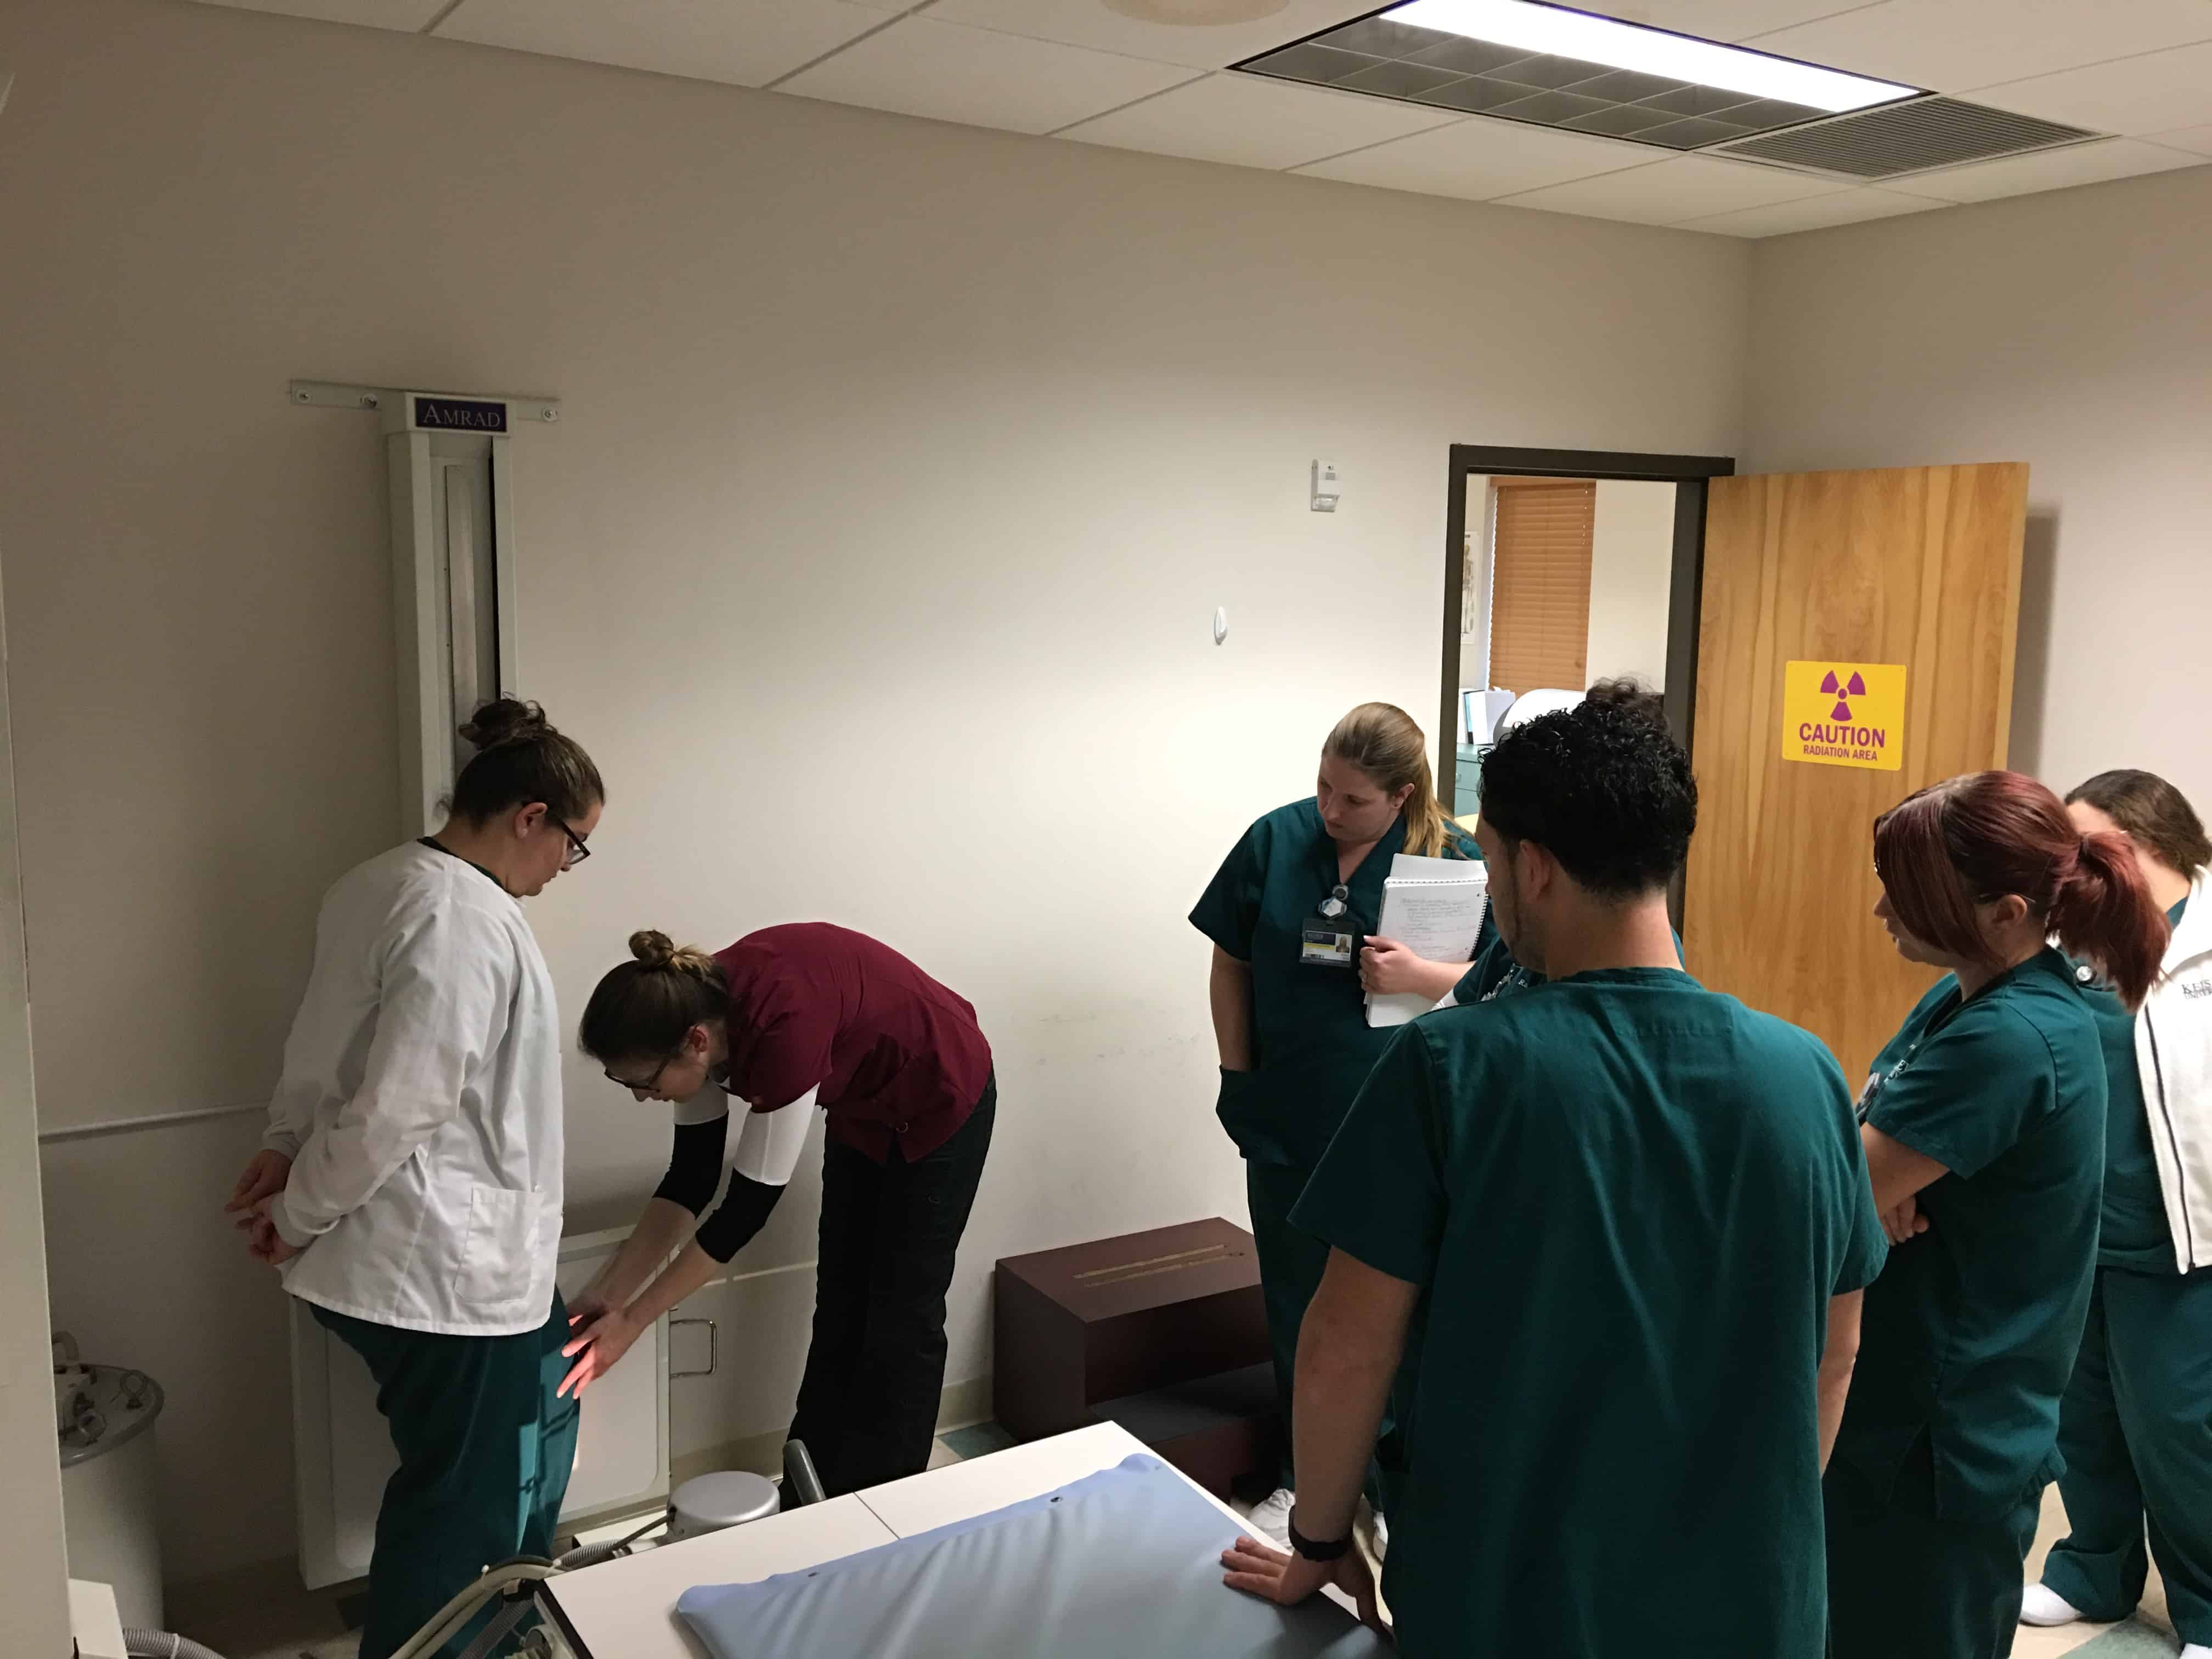 Tampa’s Radiologic Technology Students Attend Orthopedic Workshop